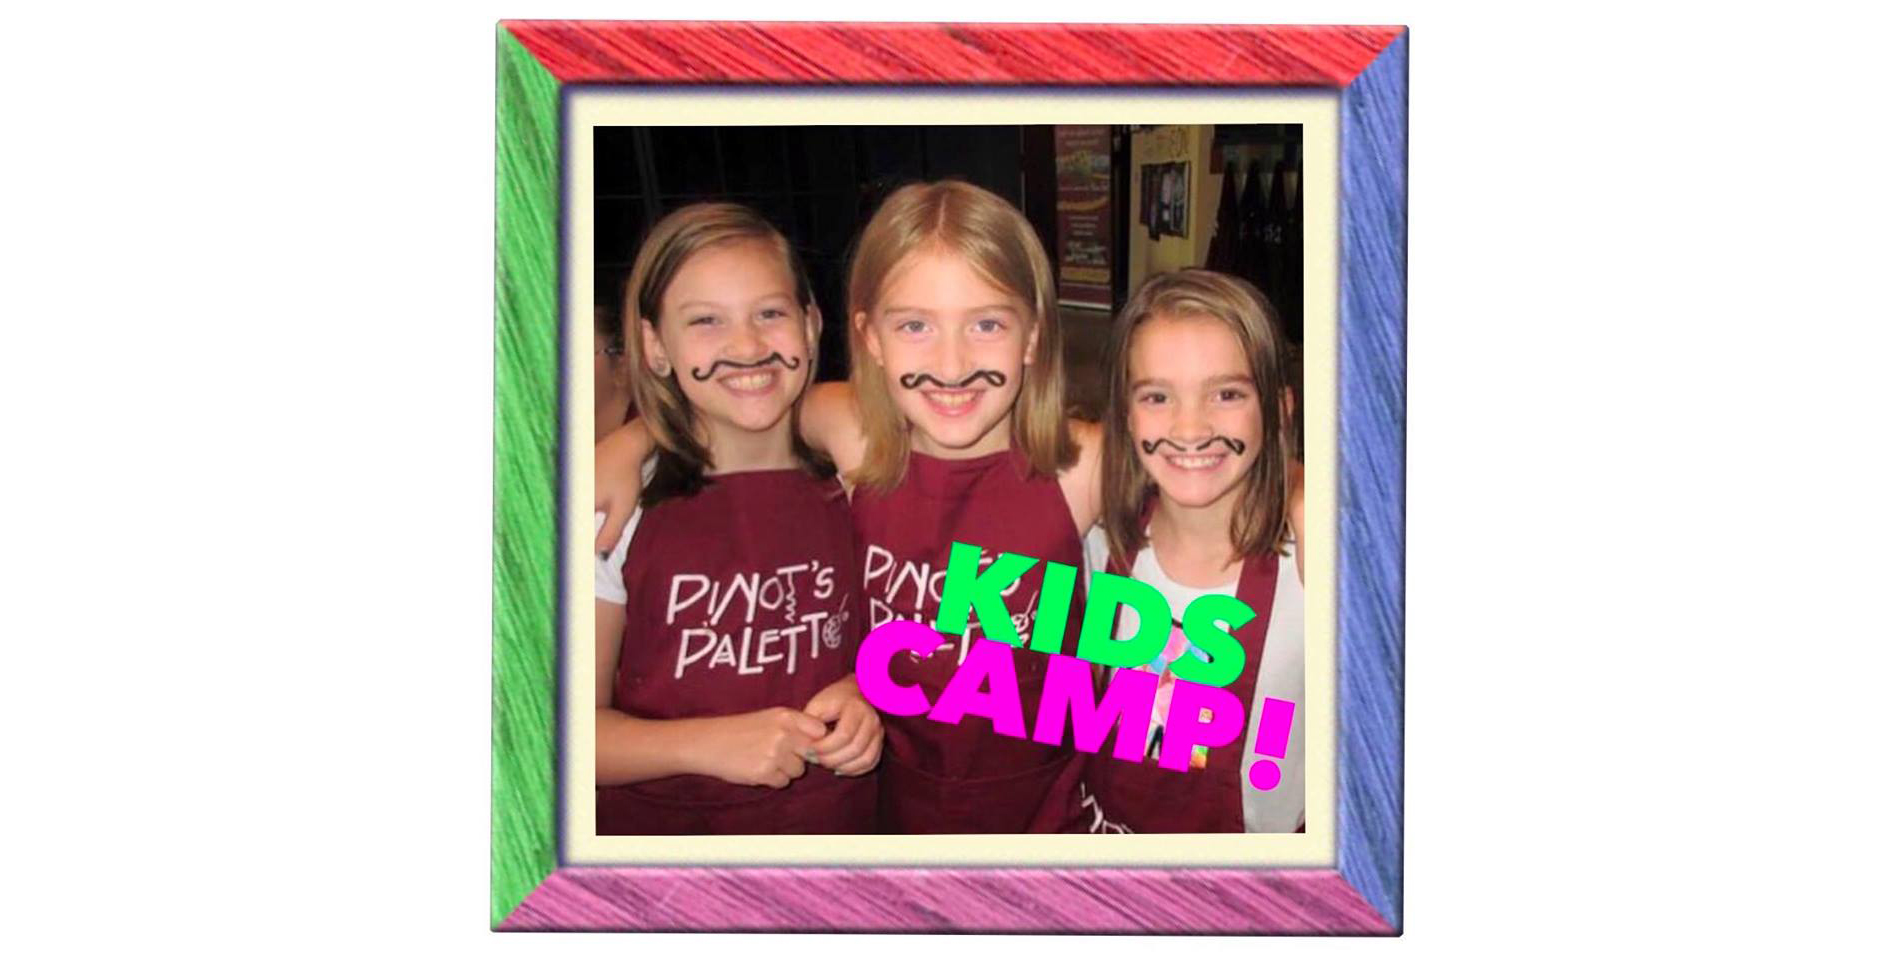 Summer Camps by Pinot's